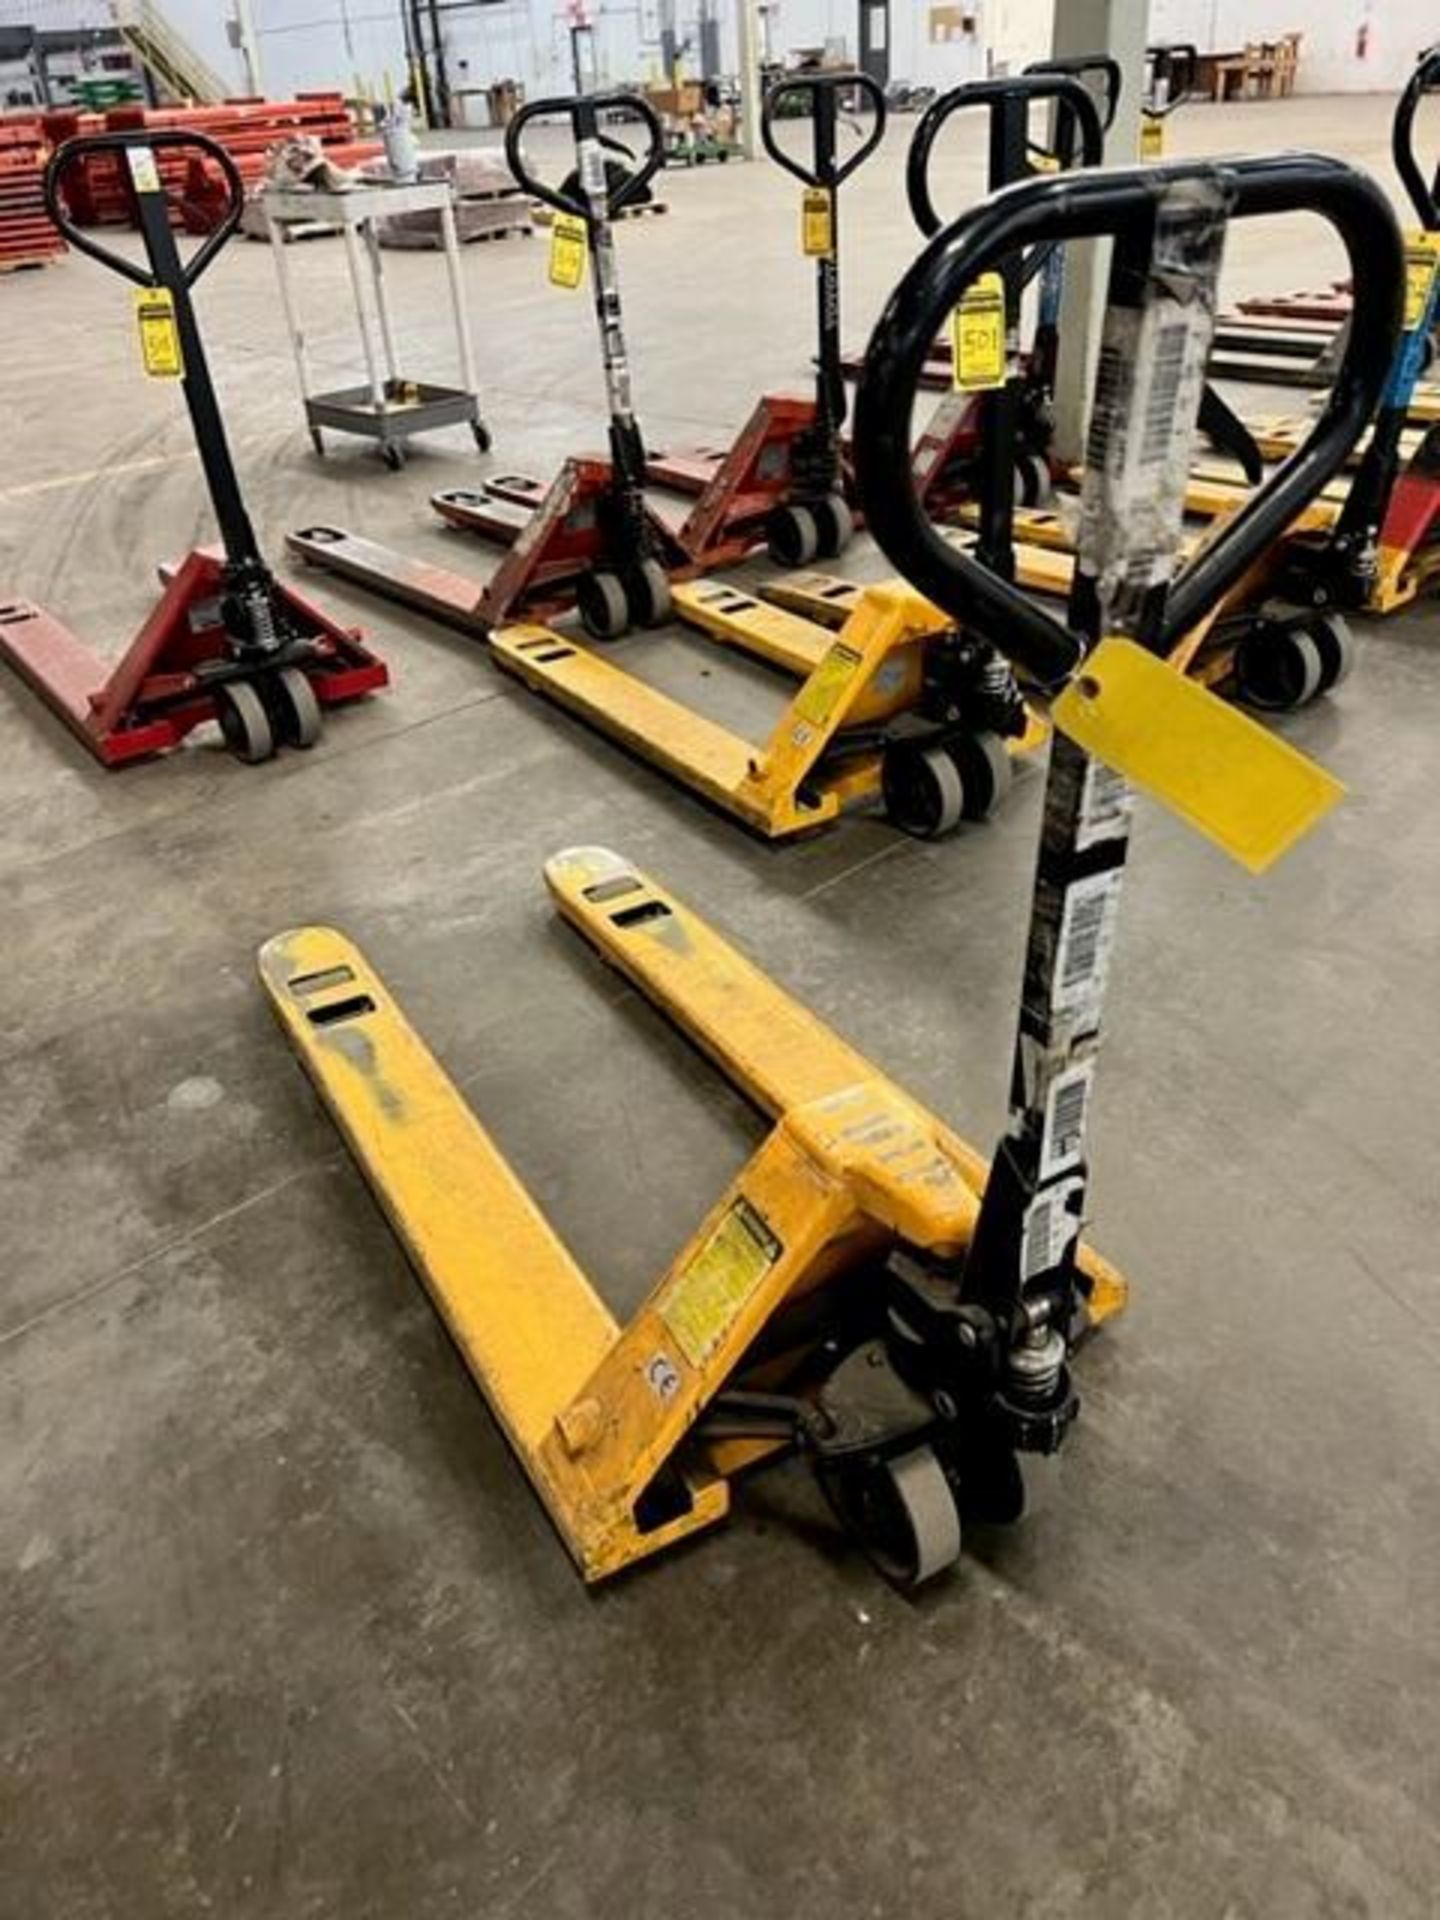 Uline 5,500 LB. Pallet Jack ($10 Loading fee will be added to buyers invoice)